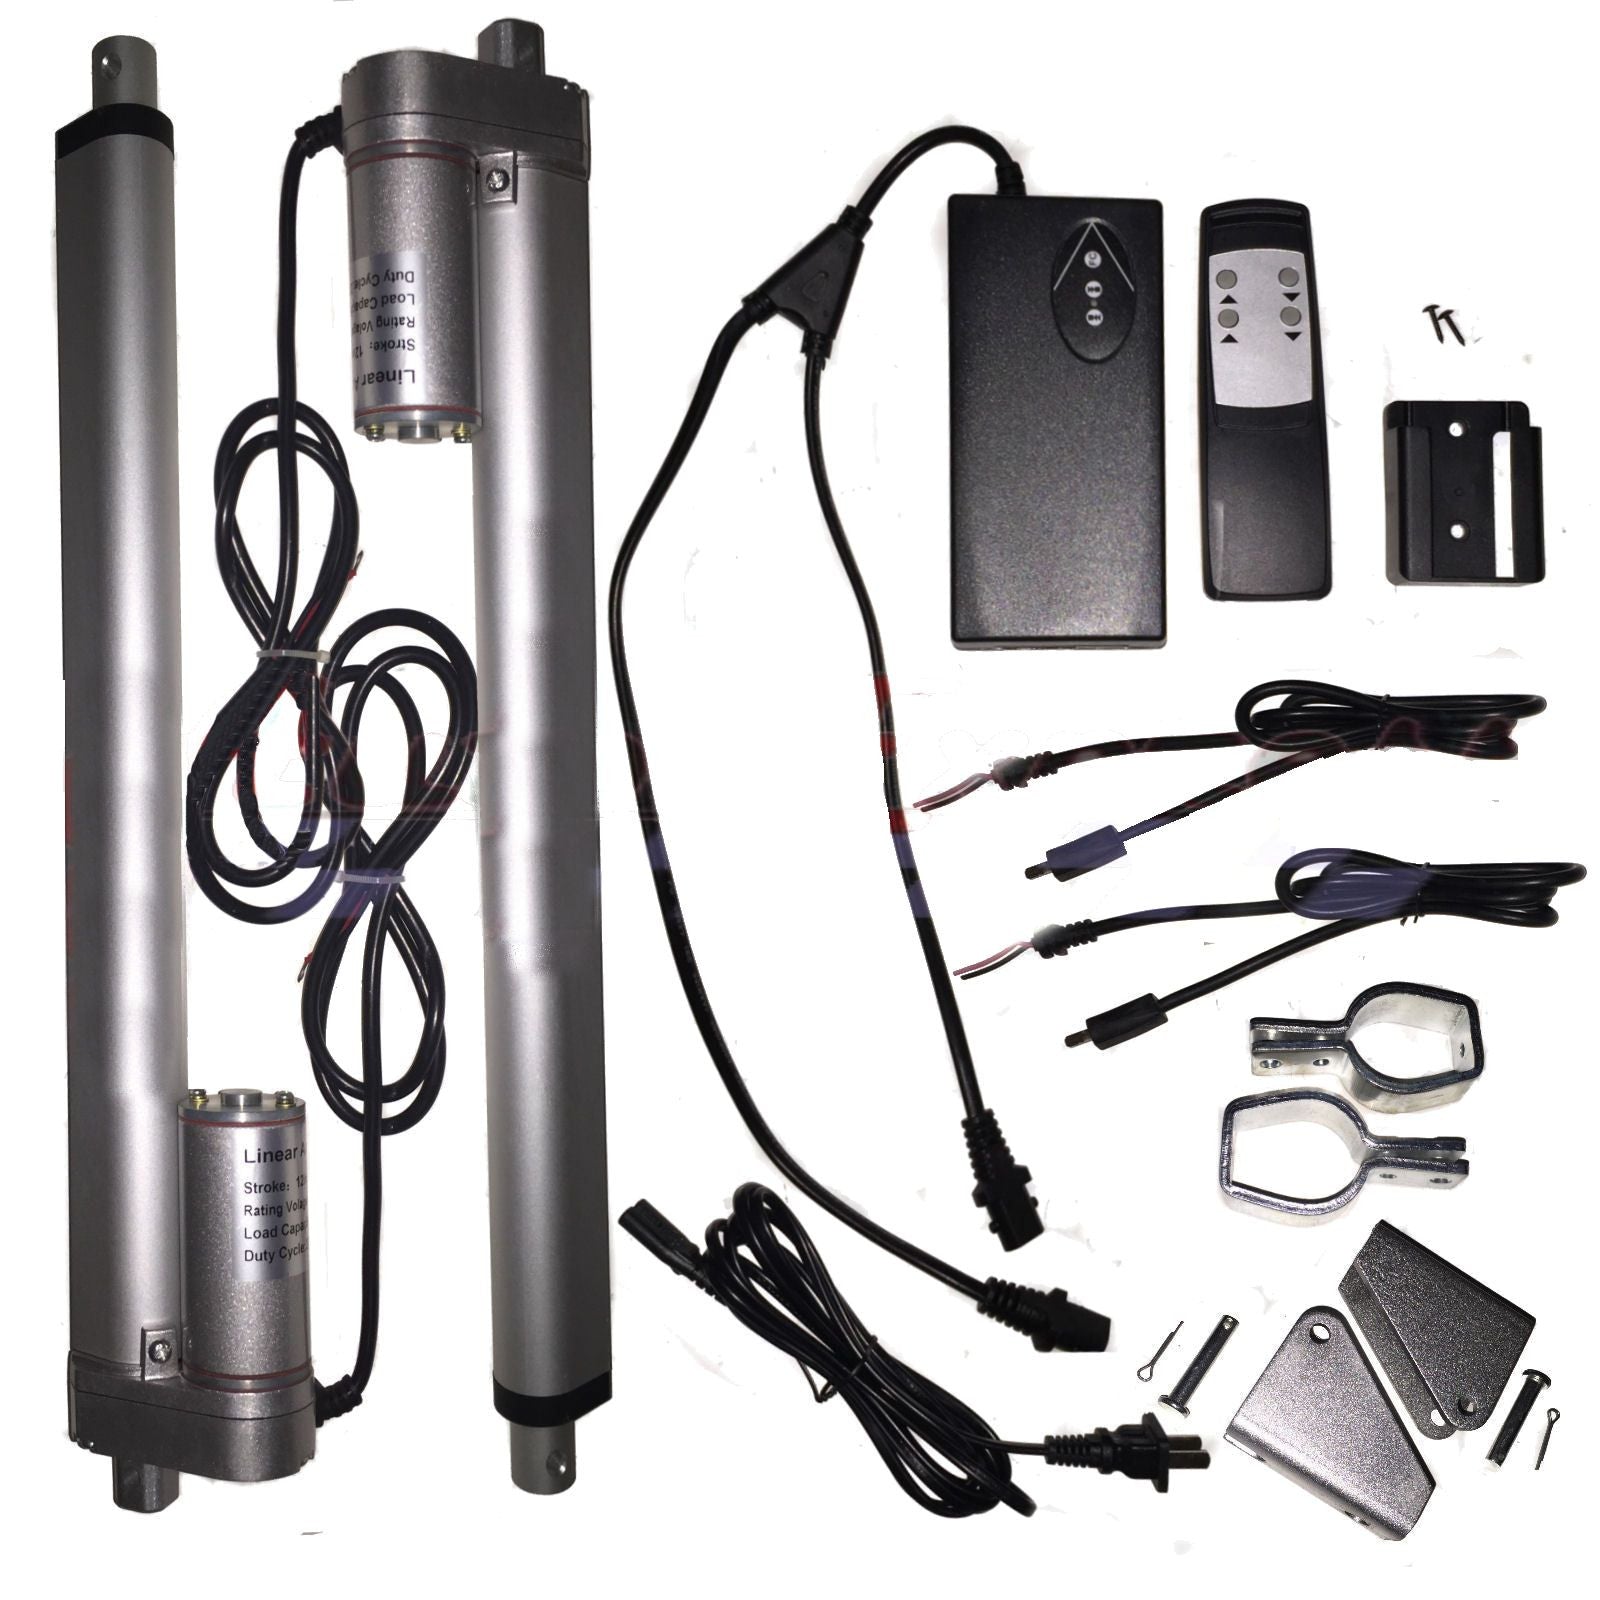 2 Linear Actuators 8" inch Stroke 12V 110V Power Supply With Remote Bracket Set - AE-Power